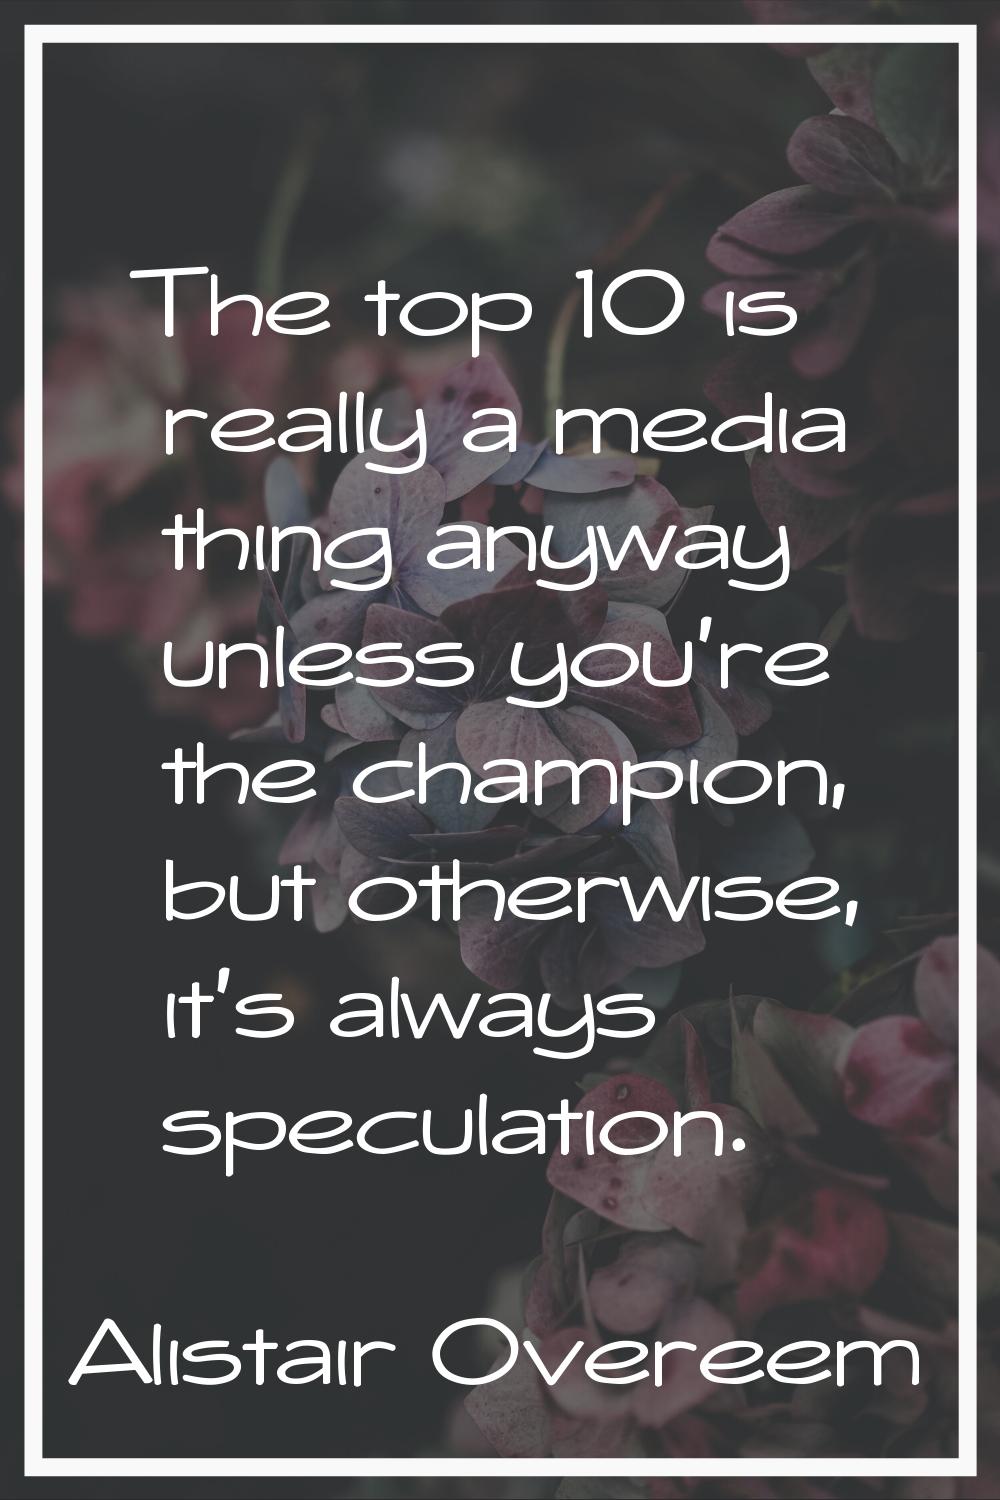 The top 10 is really a media thing anyway unless you're the champion, but otherwise, it's always sp